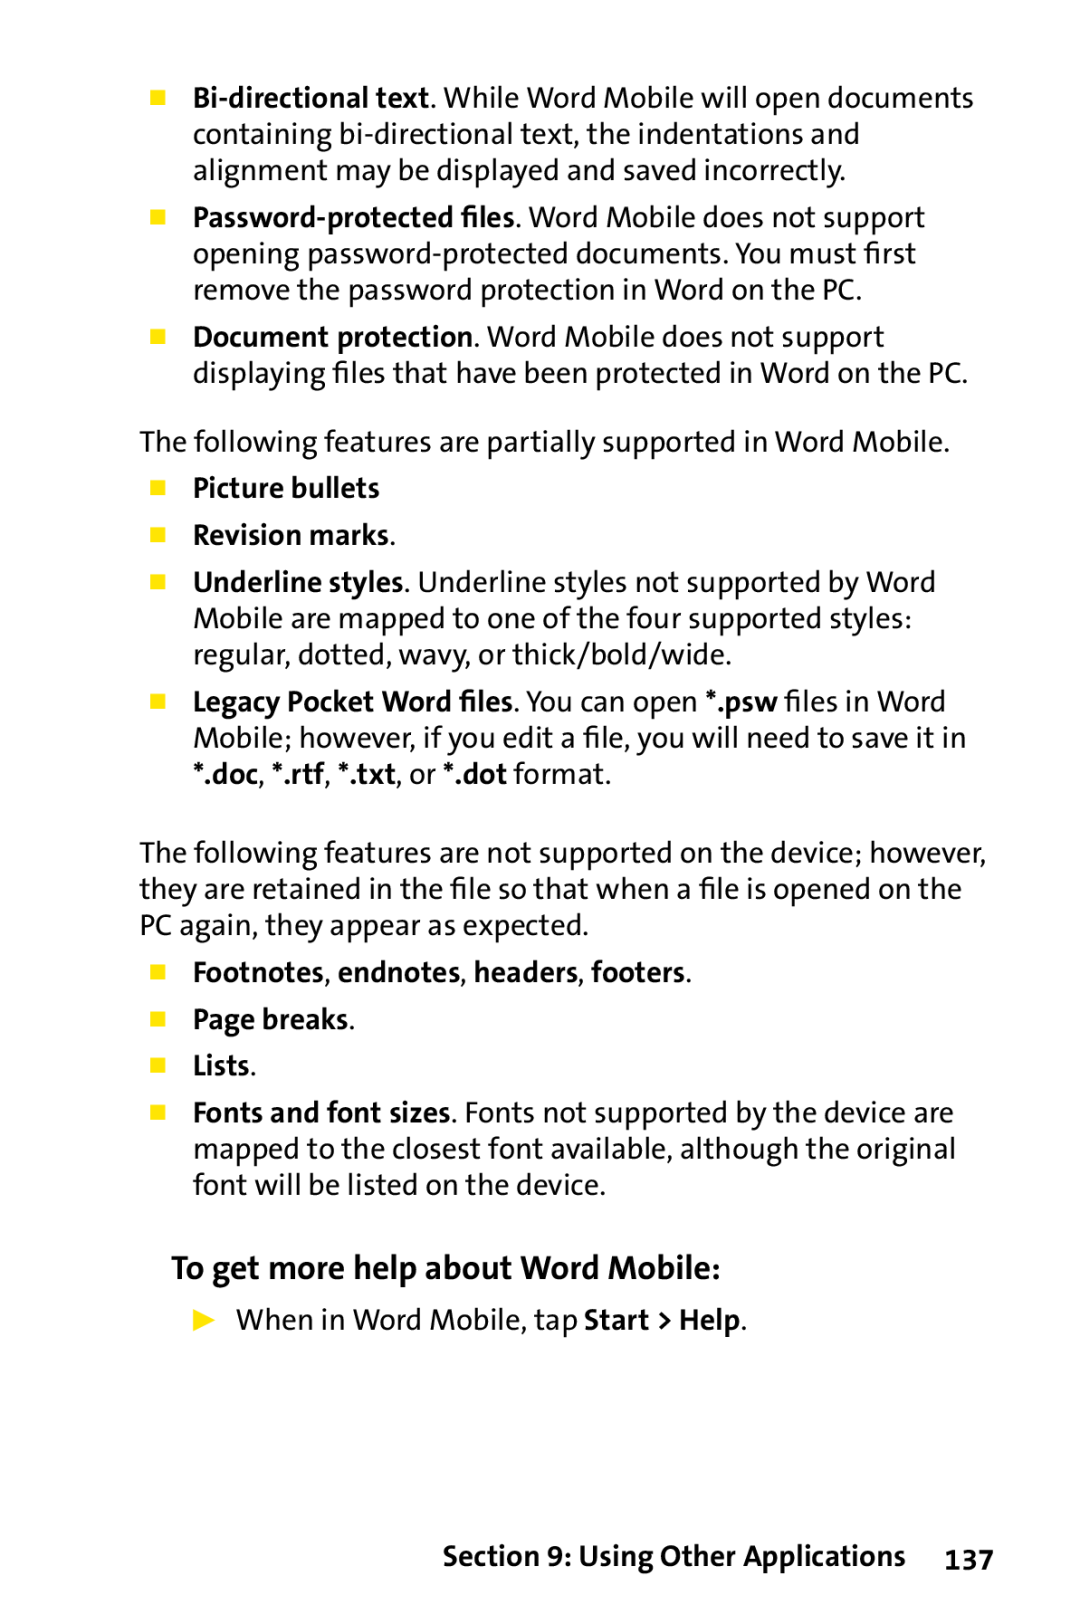 Sprint Nextel PPC-6700 To get more help about Word Mobile,  Picture bullets  Revision marks, Using Other Applications 